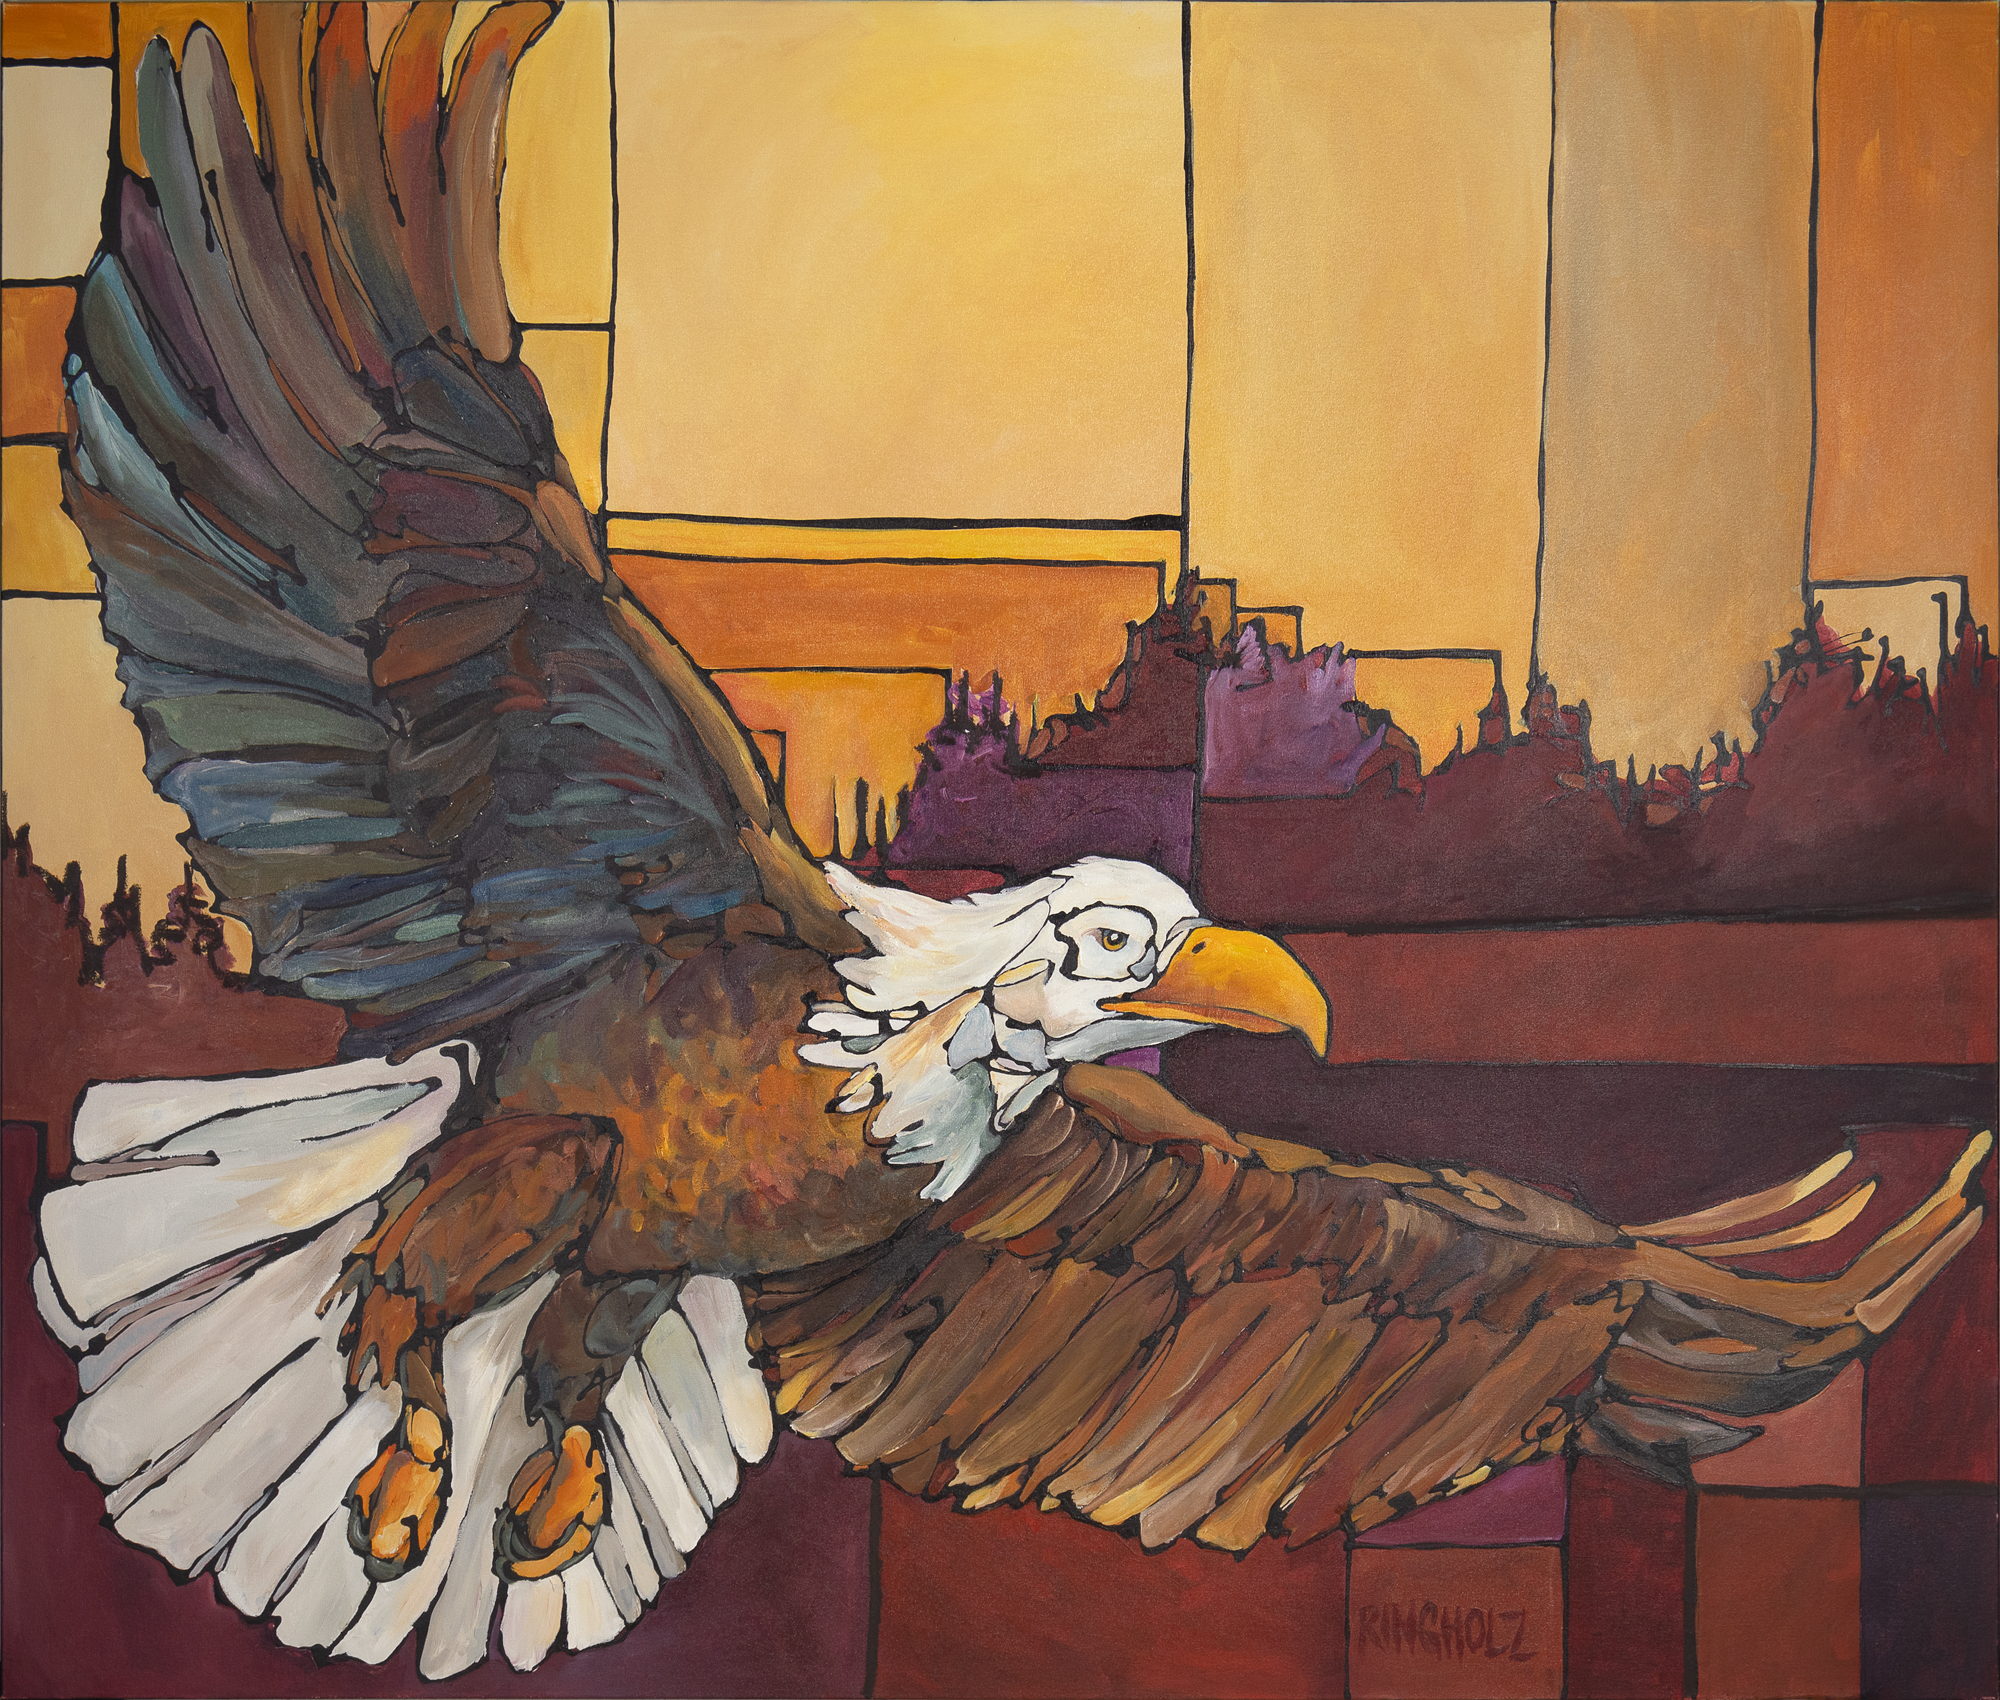 Amy Ringholz (1978- ) Soaring, 2005 oil on canvas 48 x 59 3/4 x 1 1/2